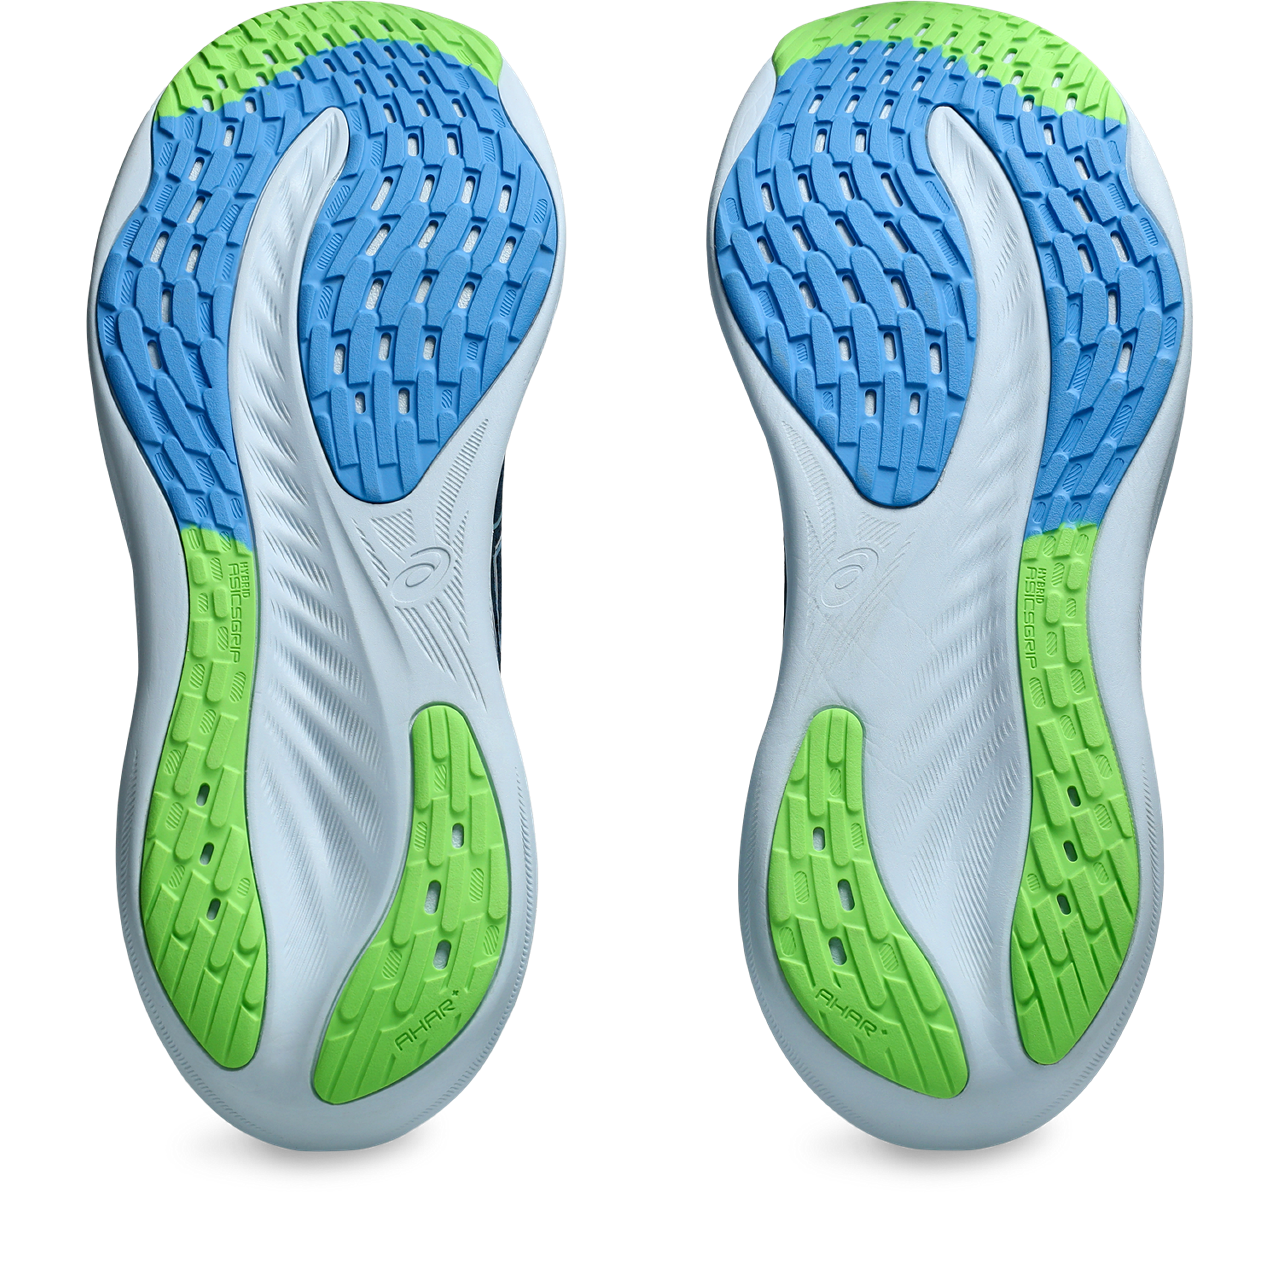 Men's GEL-NIMBUS 26, French Blue/Electric Lime, Running Shoes